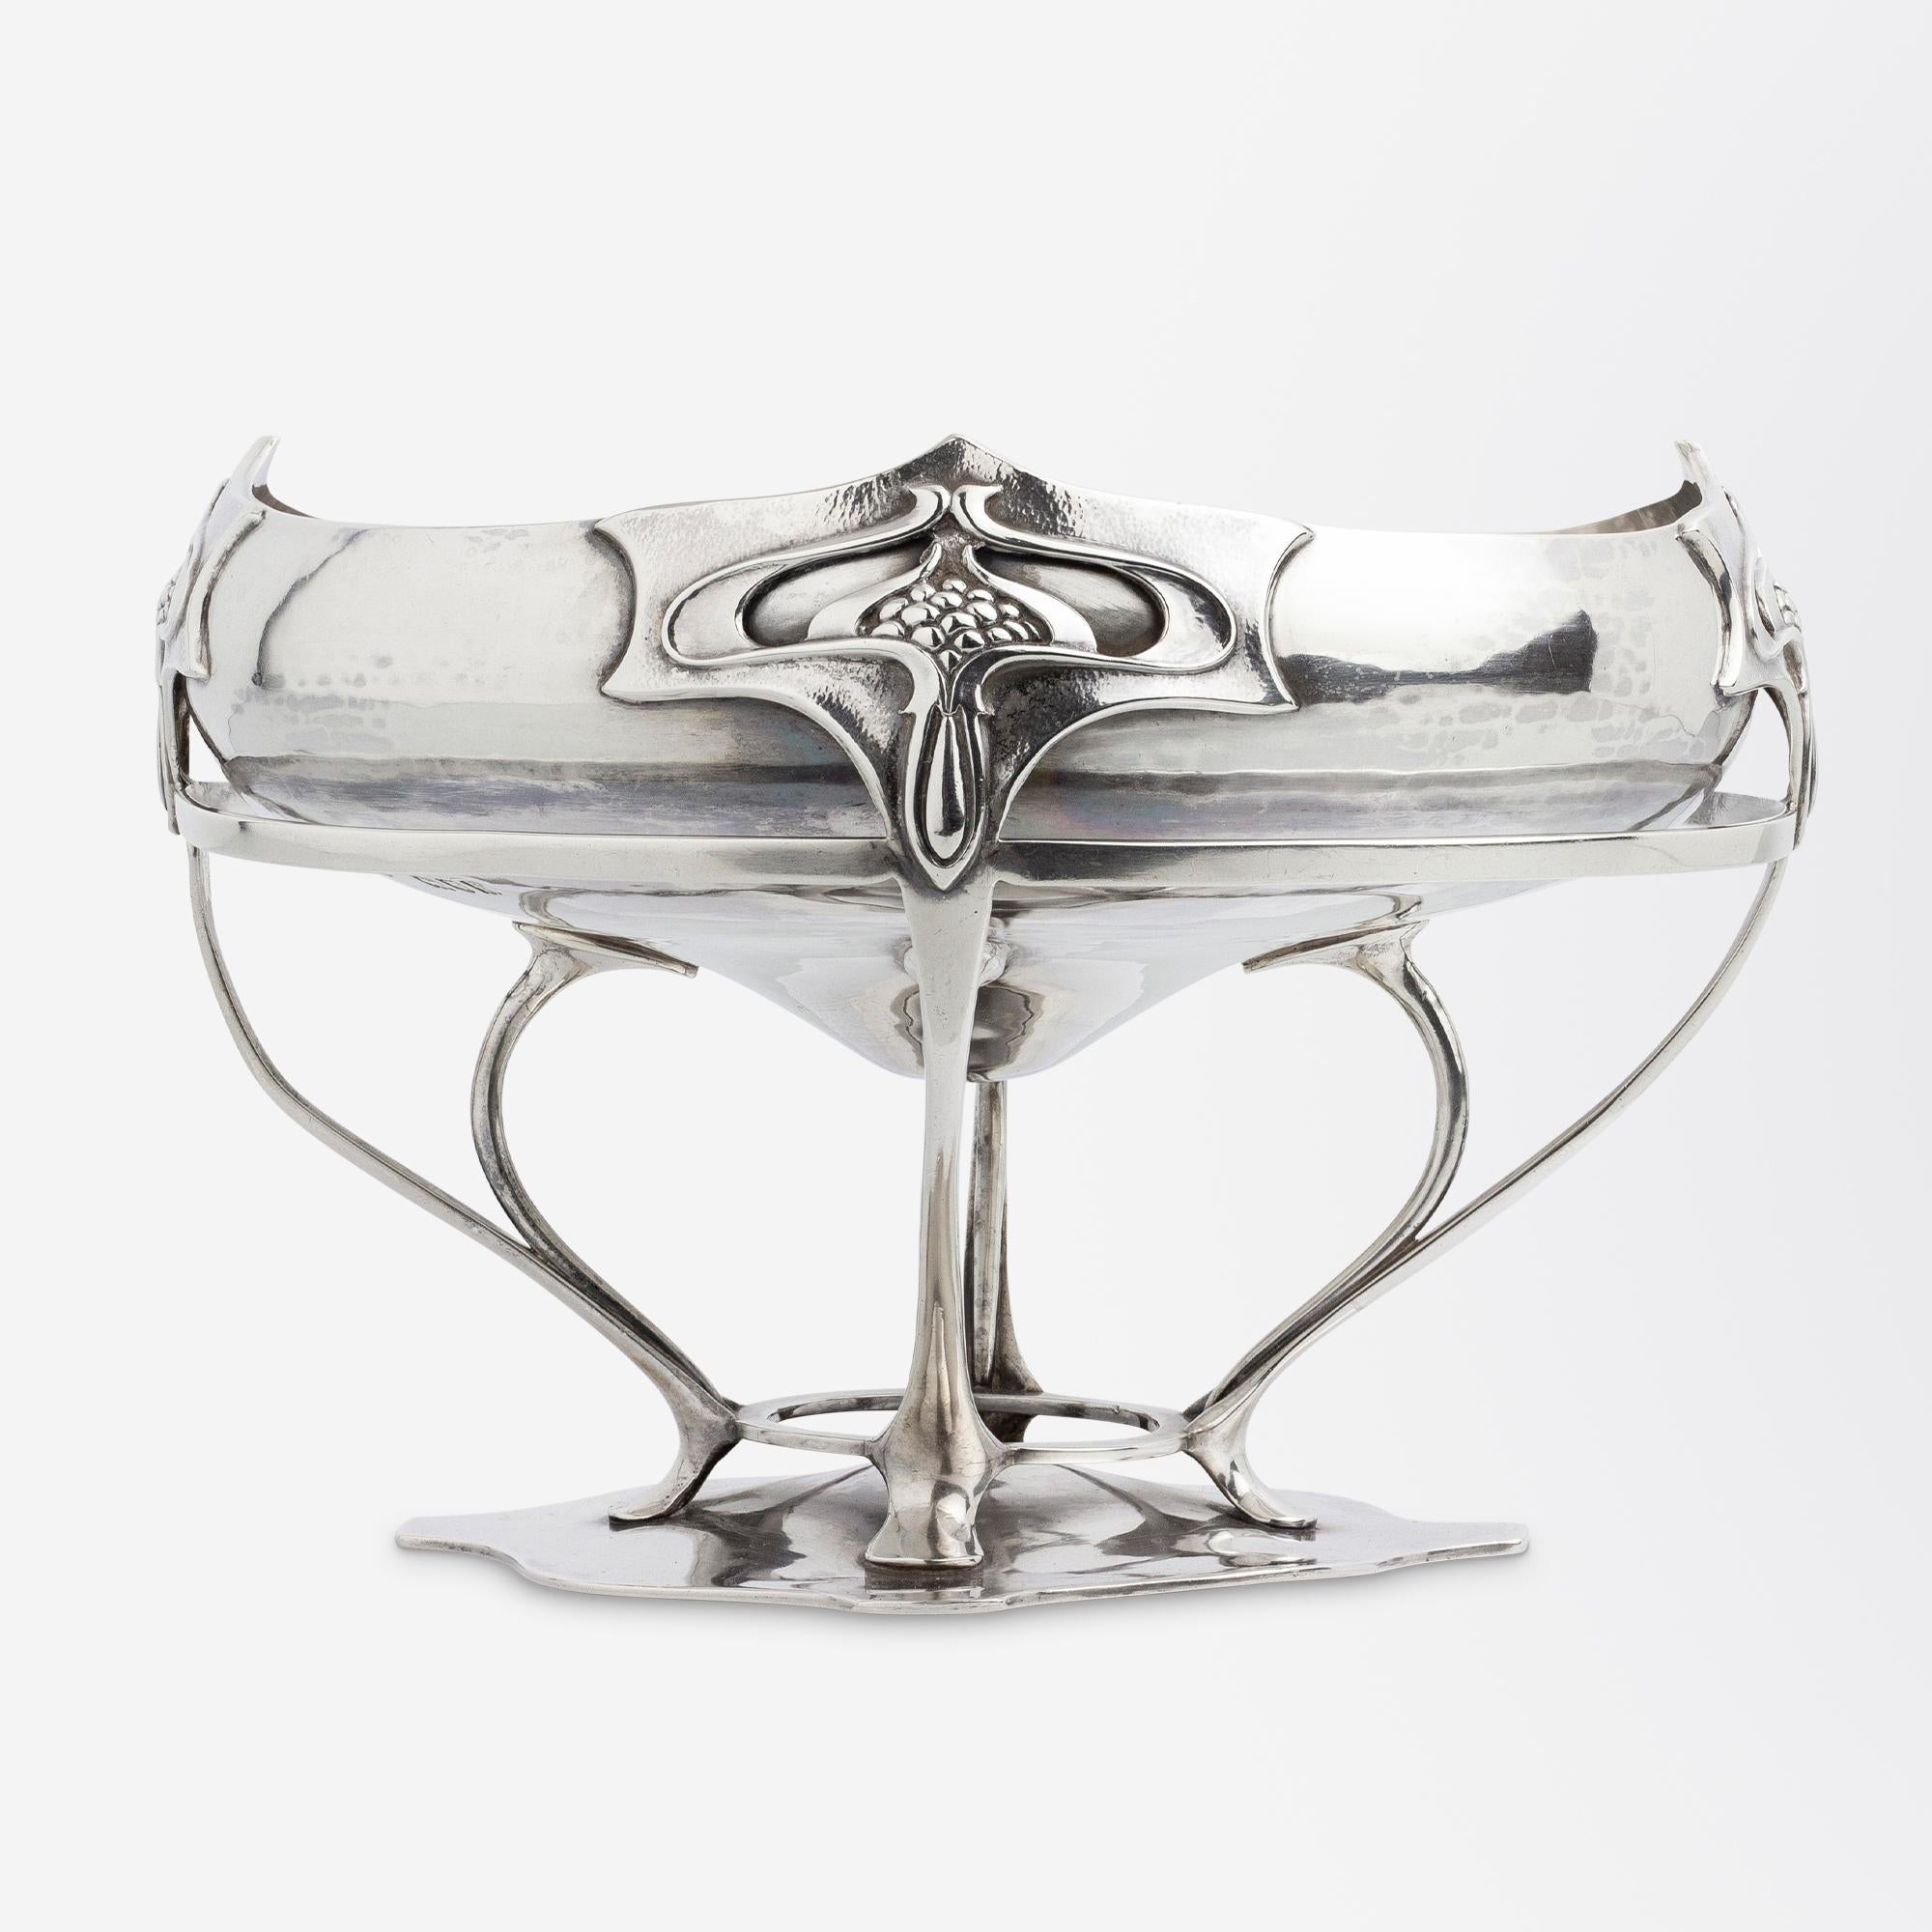 This unusual sterling silver centrepiece could be described as several things - a comport, a jardiniere or simply a footed bowl. Crafted by London silversmith William Comyns & Sons the piece has been assayed for manufacture in 1901, which is both